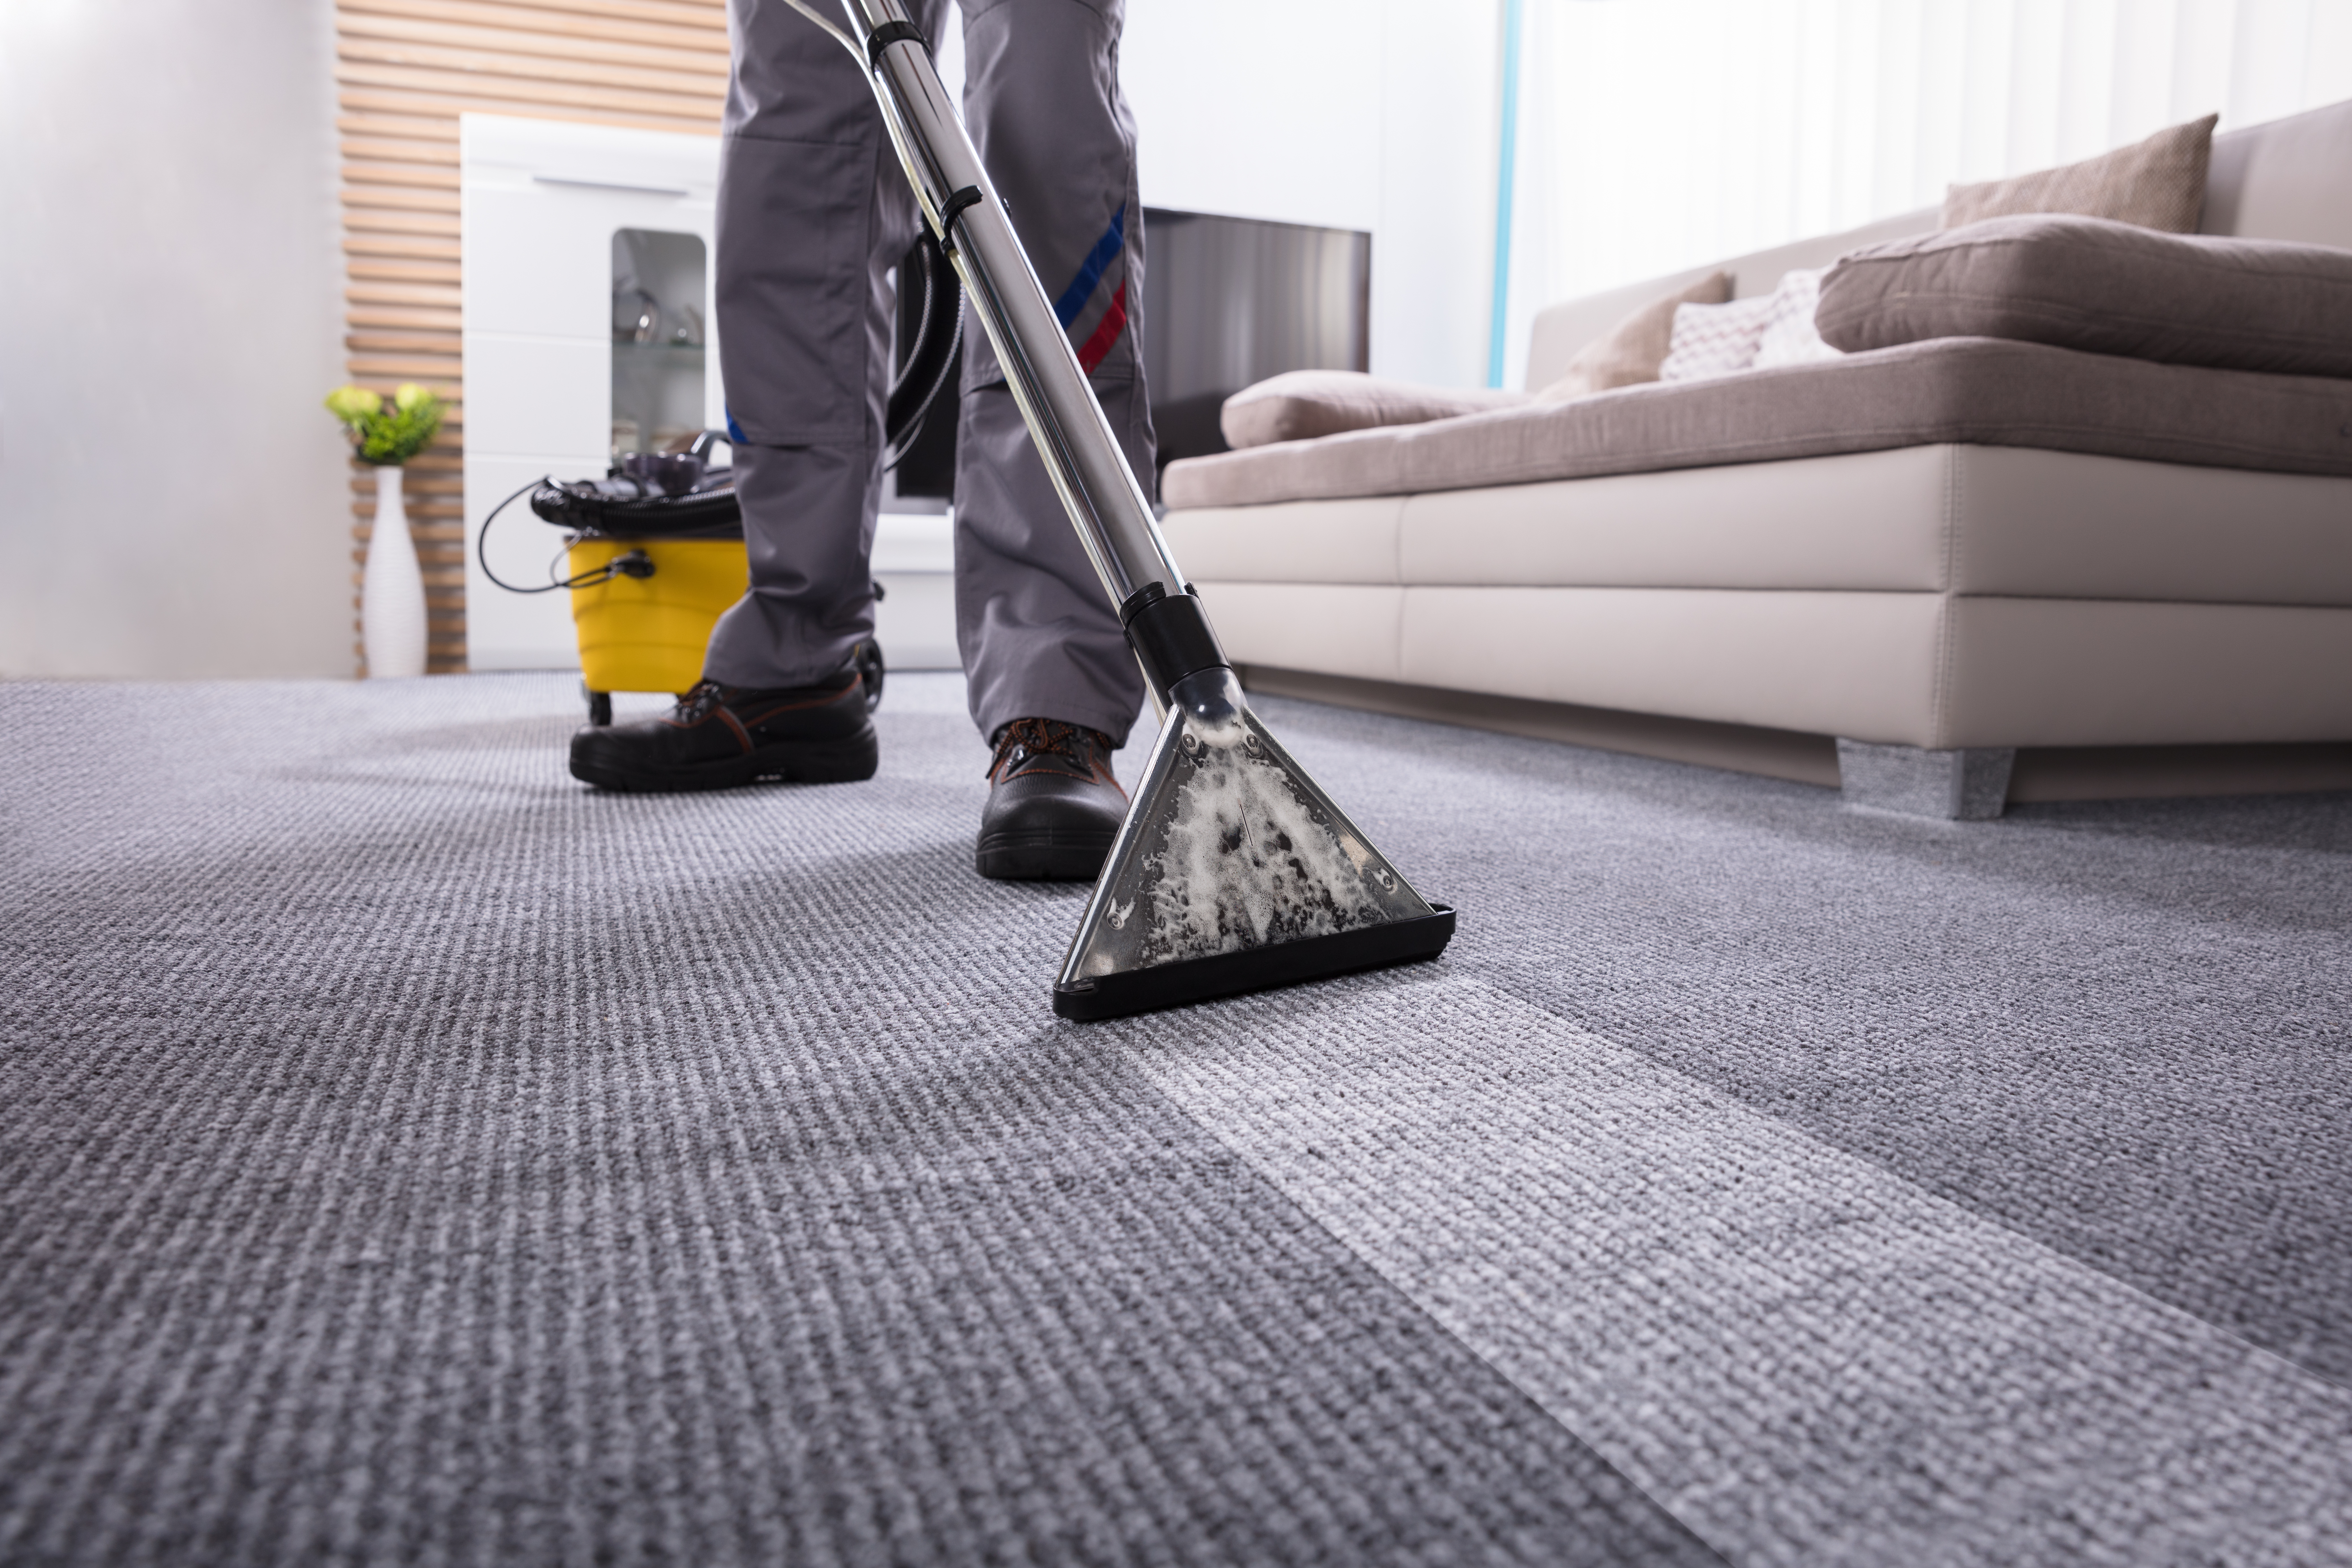 Carpet cleaning in Geelong